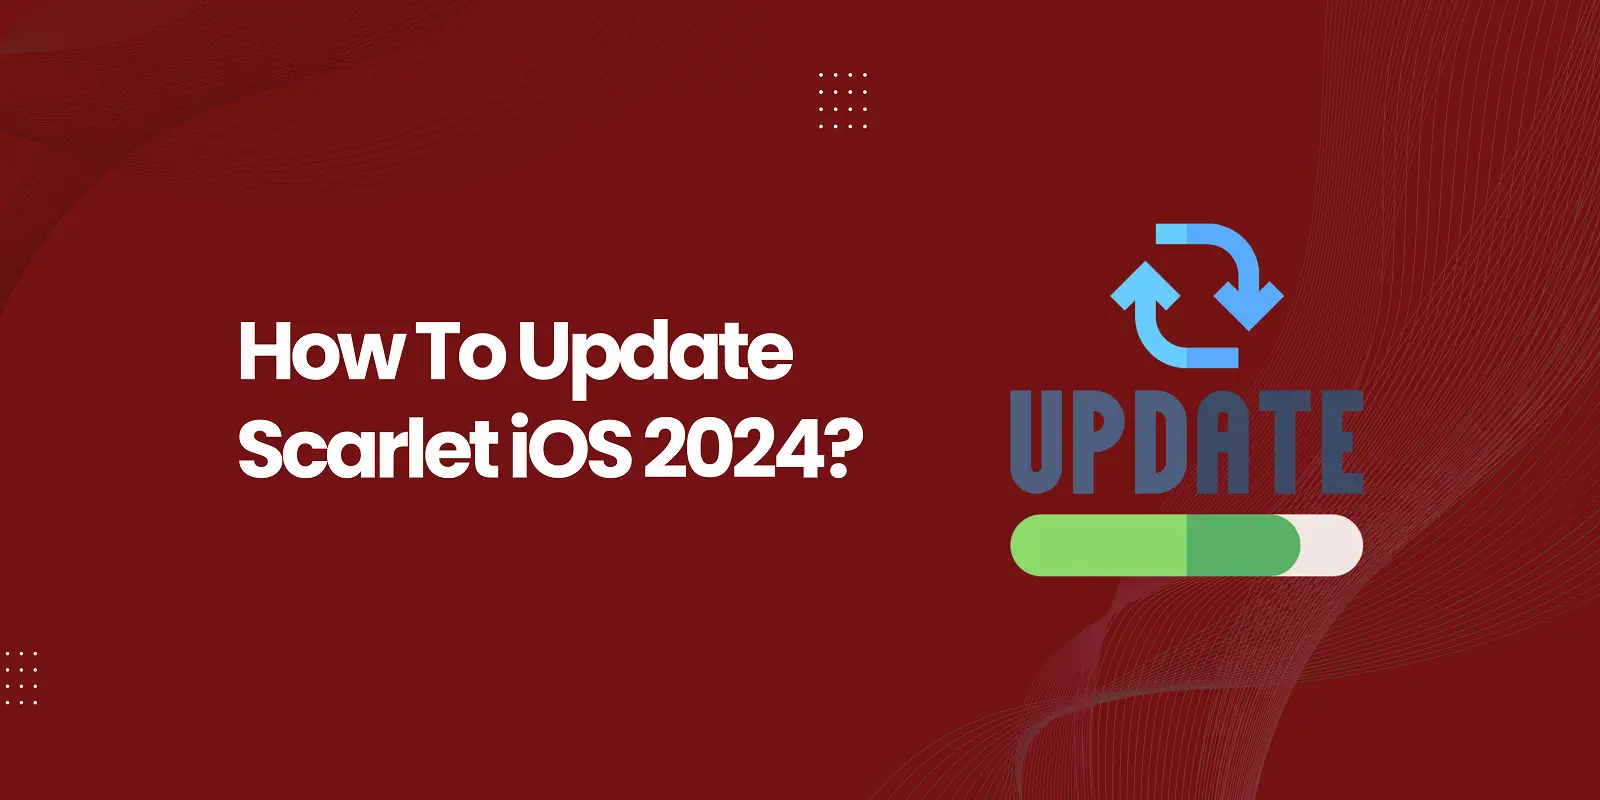 How To Update Scarlet iOS 2024?